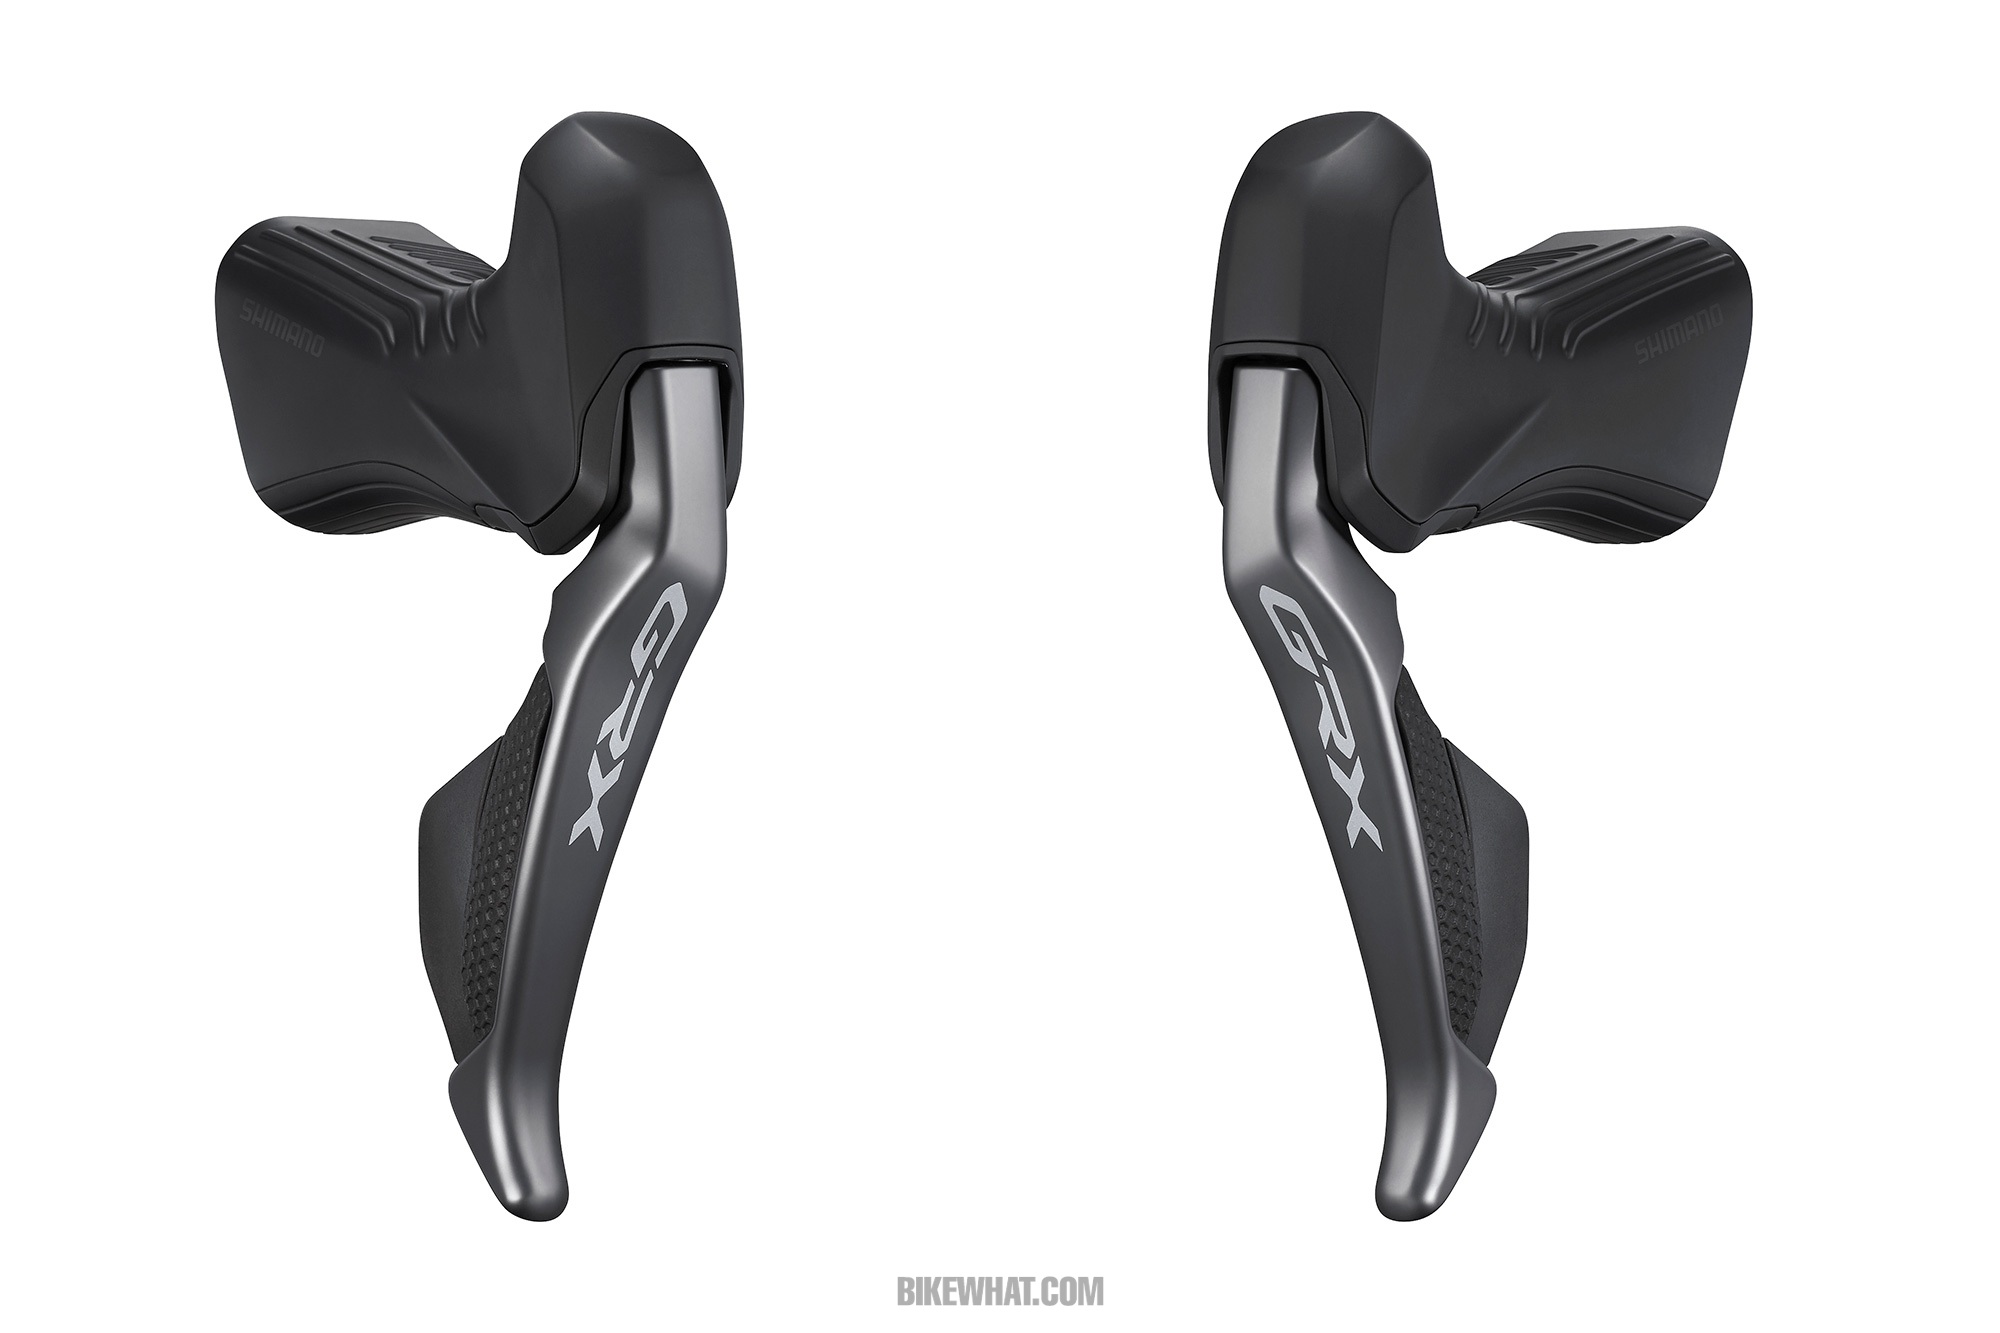 Preview_Shimano_GRX_ST-RX815.jpg